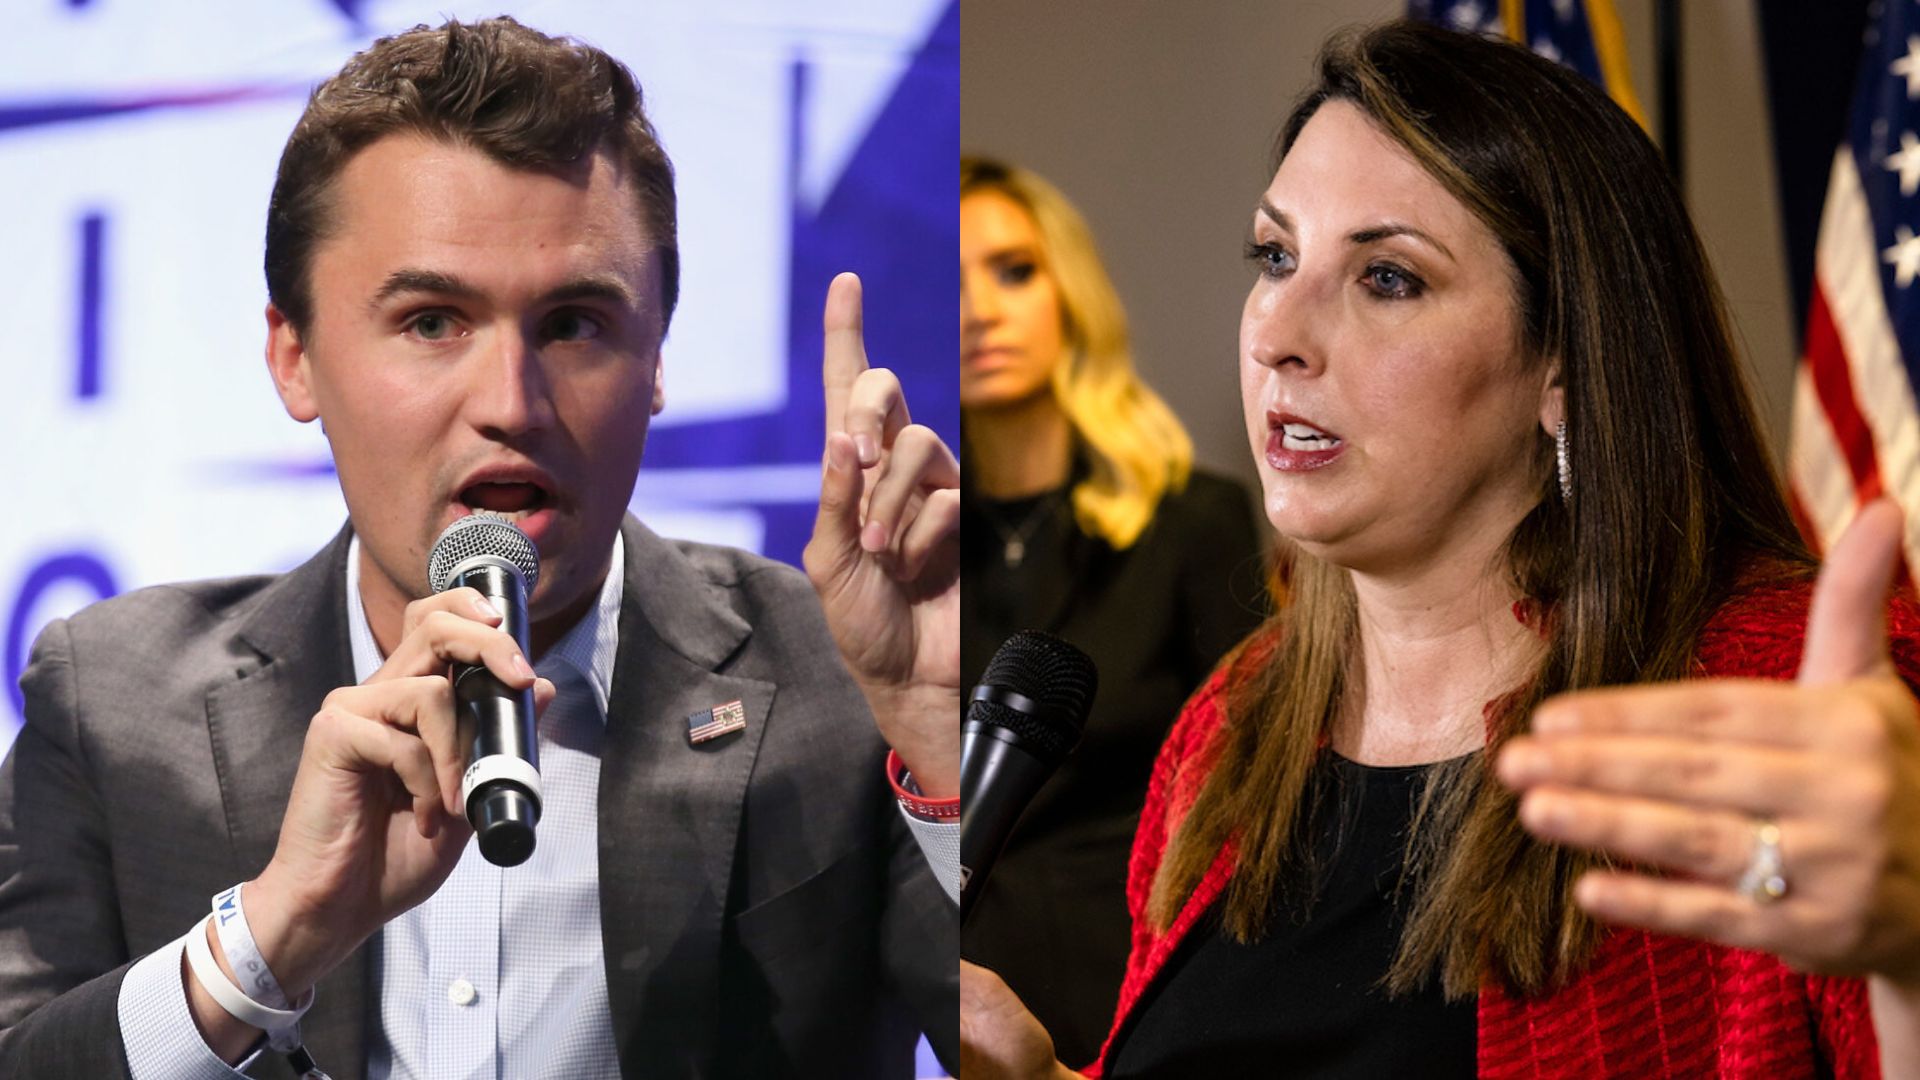 Ronna McDaniel Blasts Fascist Organizer Charlie Kirk, Accuses Him of Trying to ‘Take Over the RNC’ (mediaite.com)